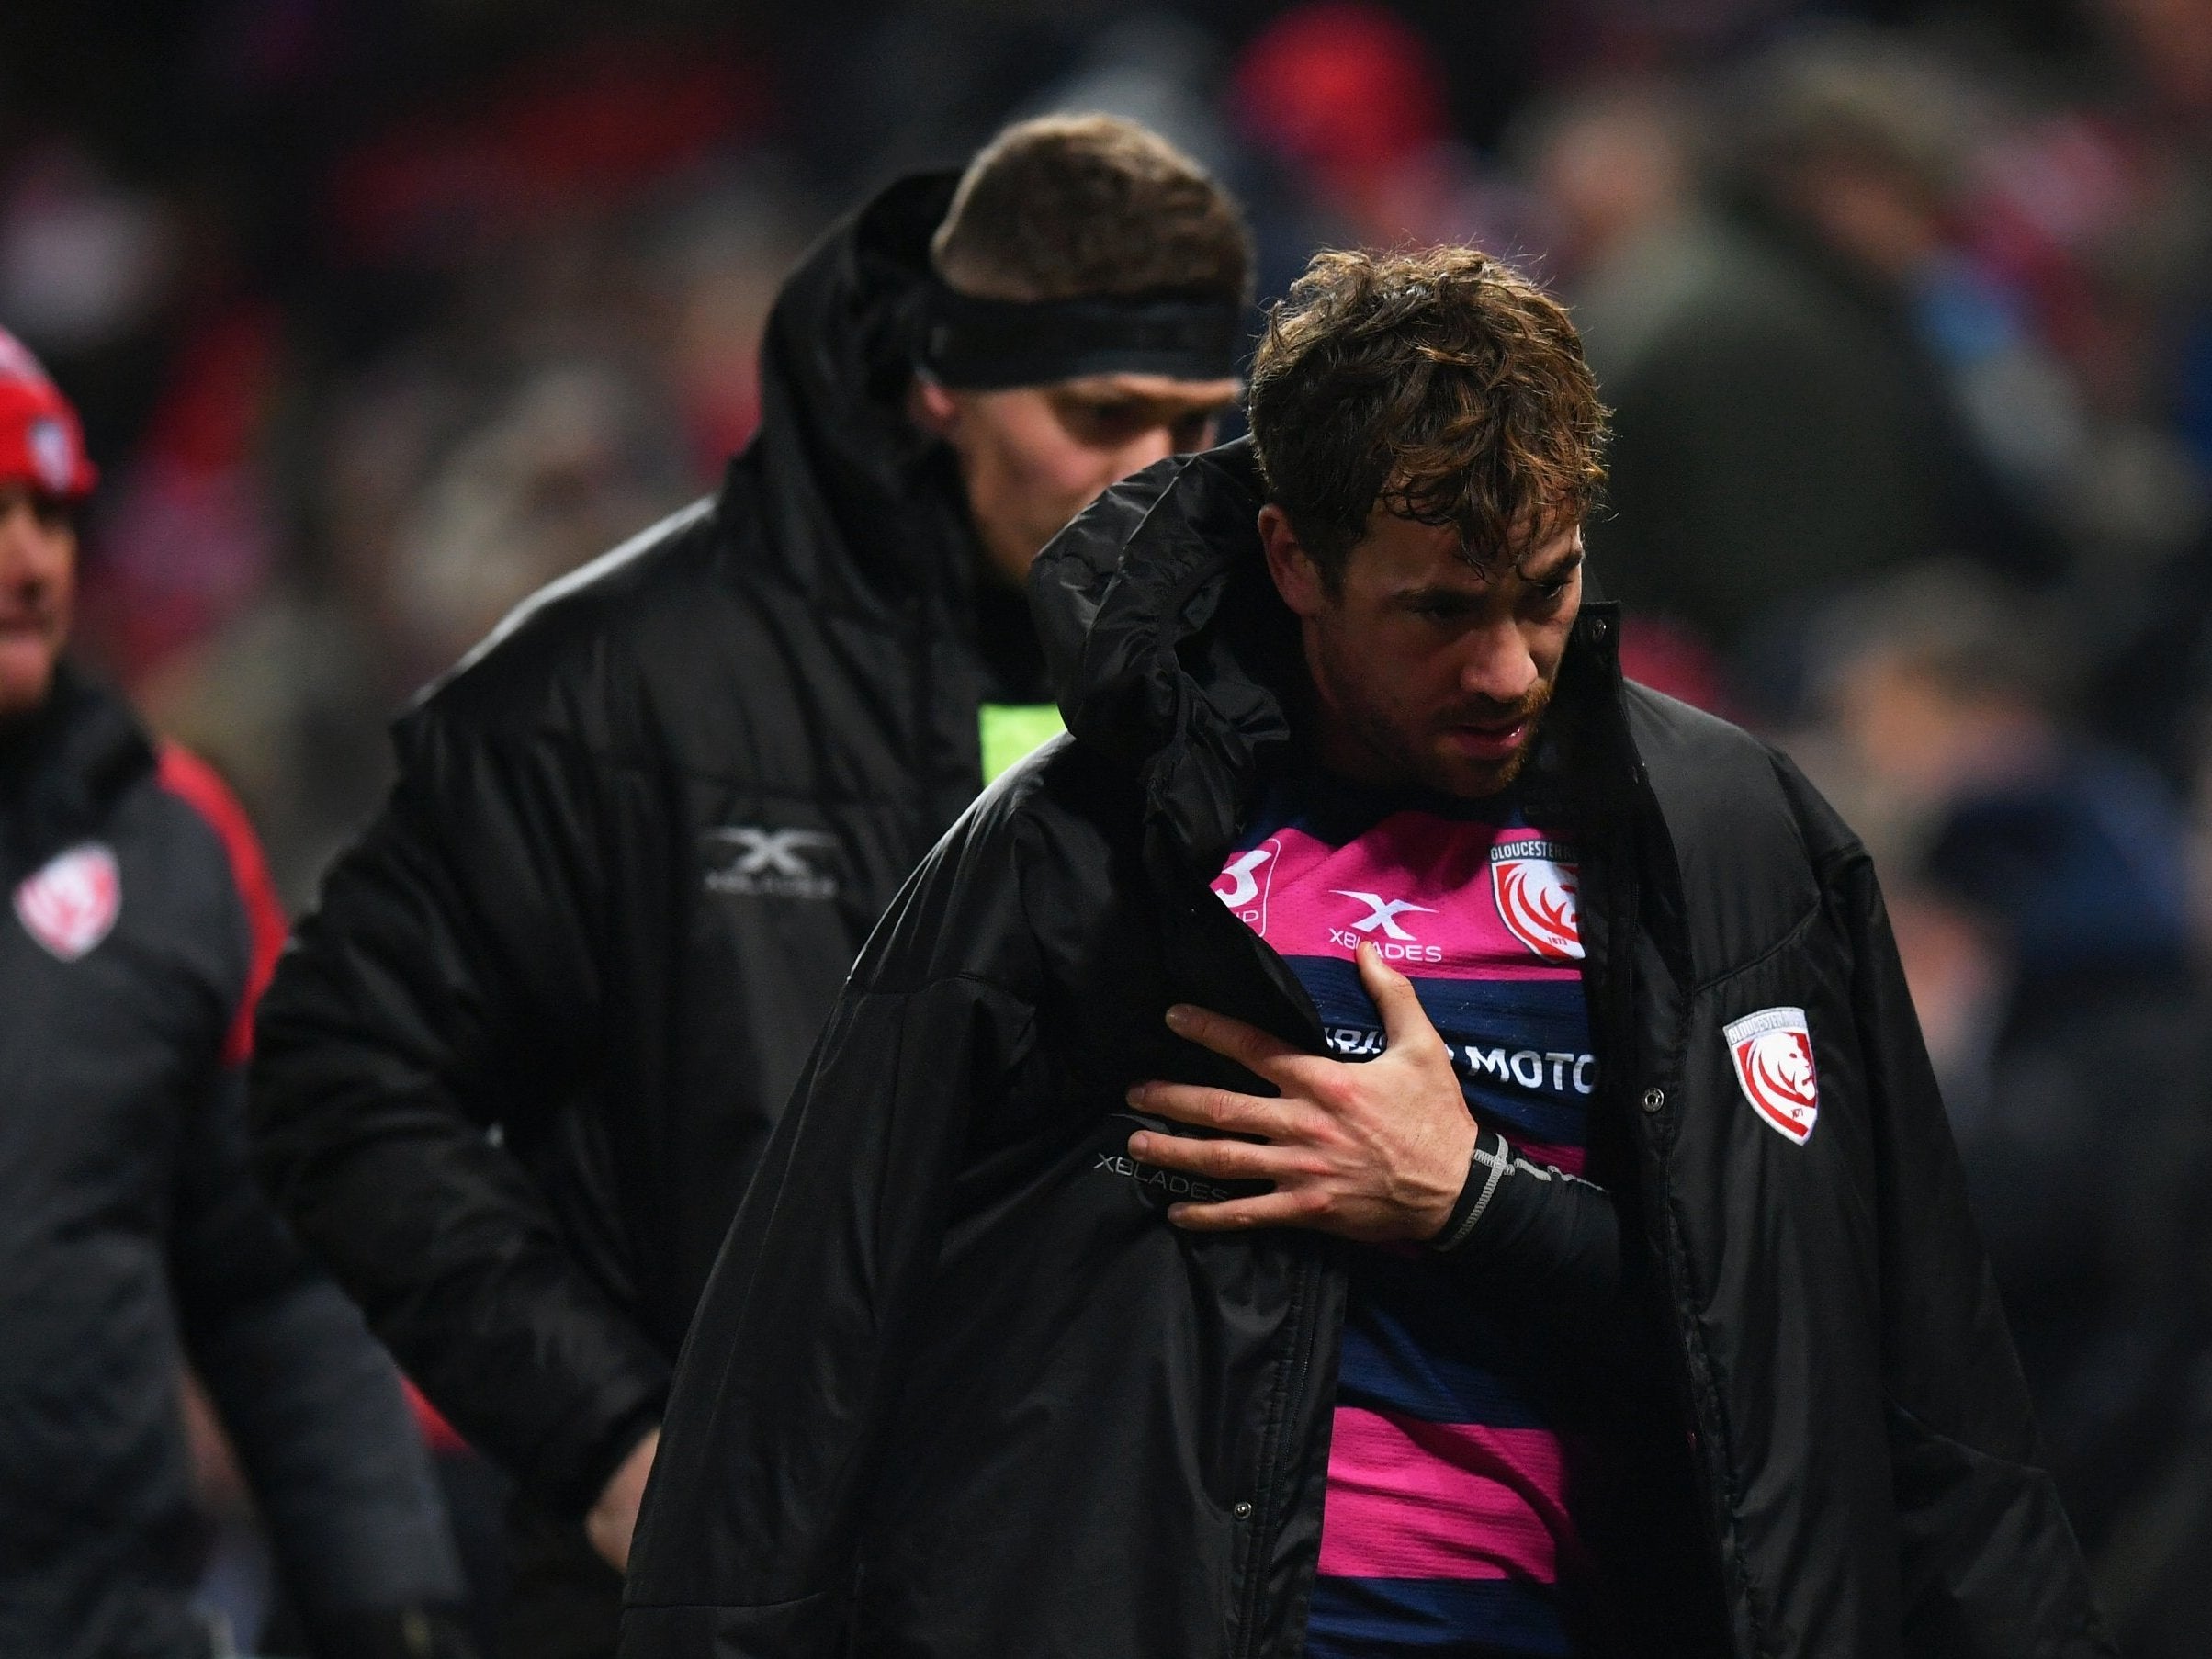 Cipriani was forced off the pitch before half-time and left Kingsholm in a sling